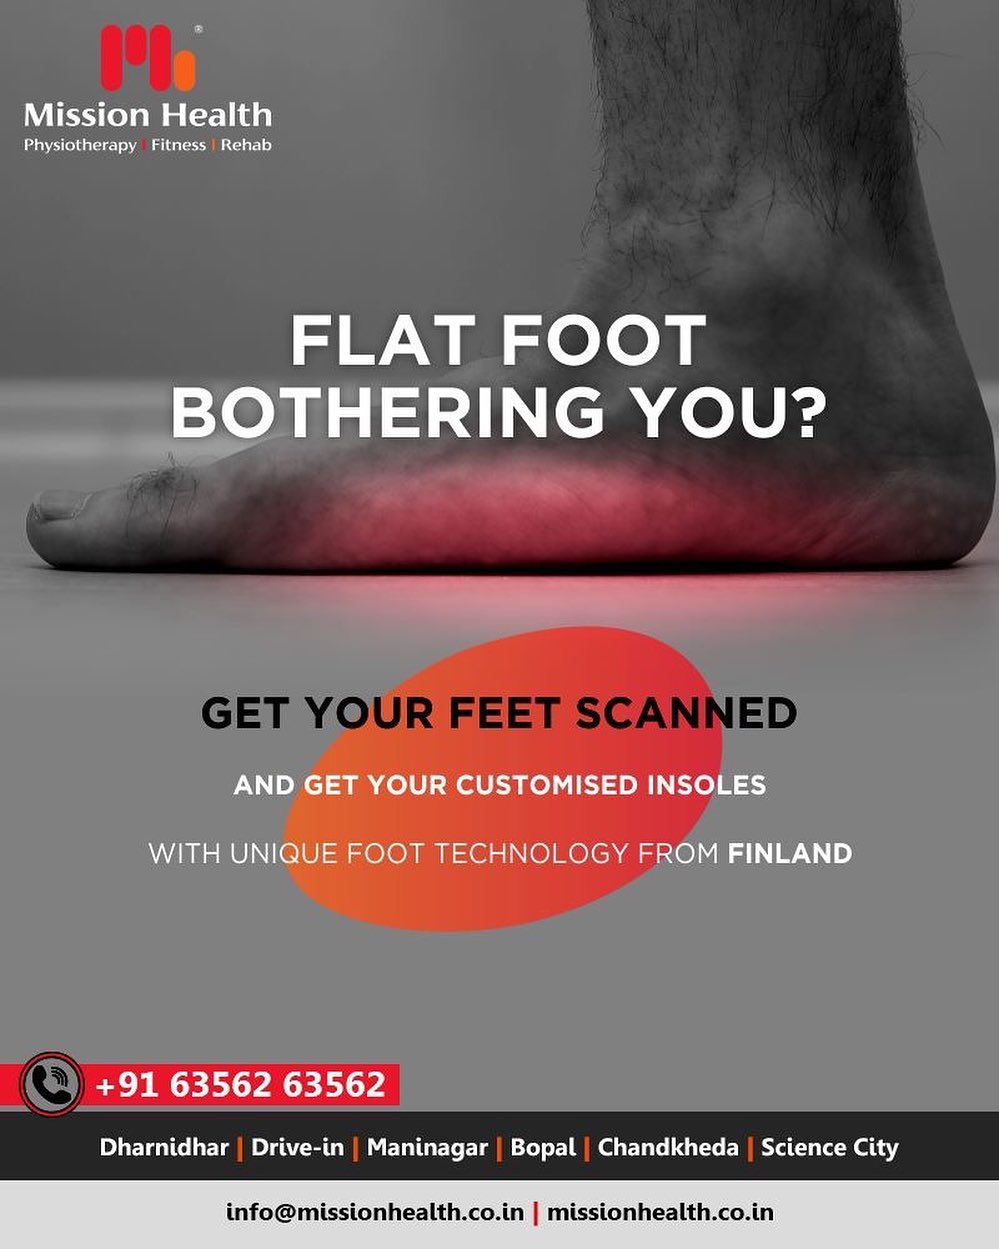 Don’t let your flat foot pain become a reason of everyday discomfort!

#FlatFootPain #MissionHealth #MissionHealthIndia #MovementIsLife